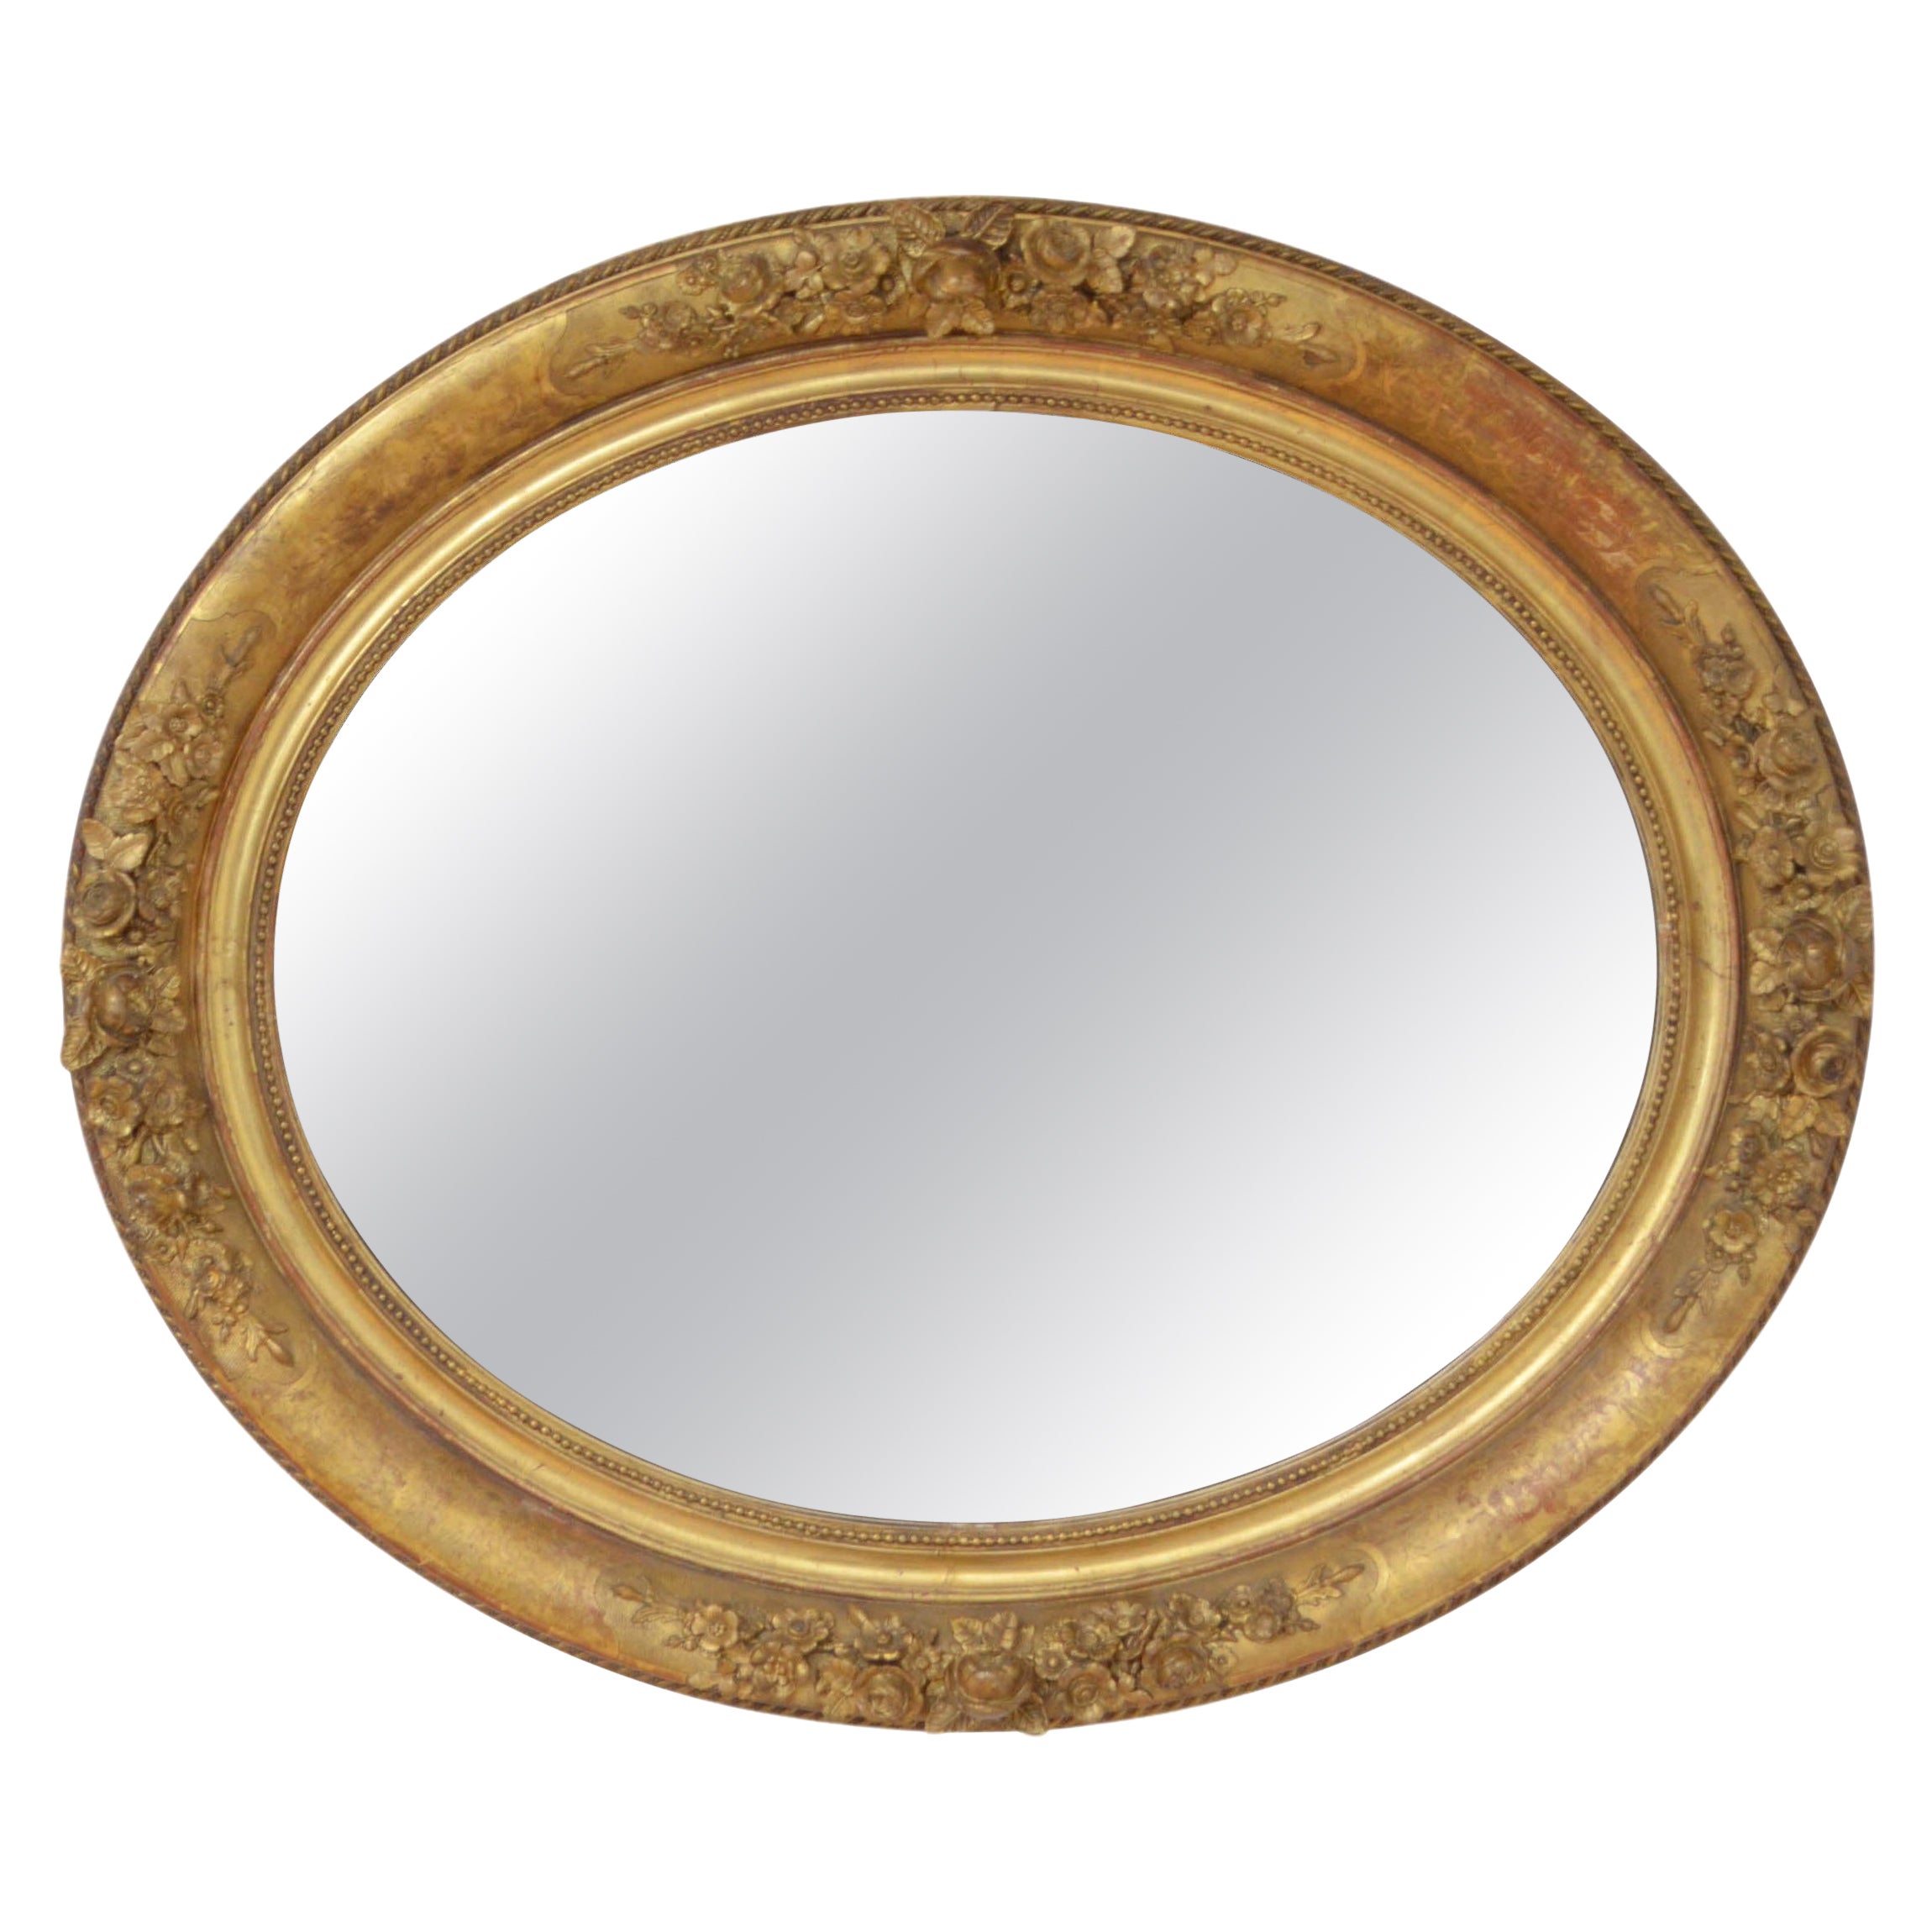 Large 19th Century Giltwood Wall Mirror